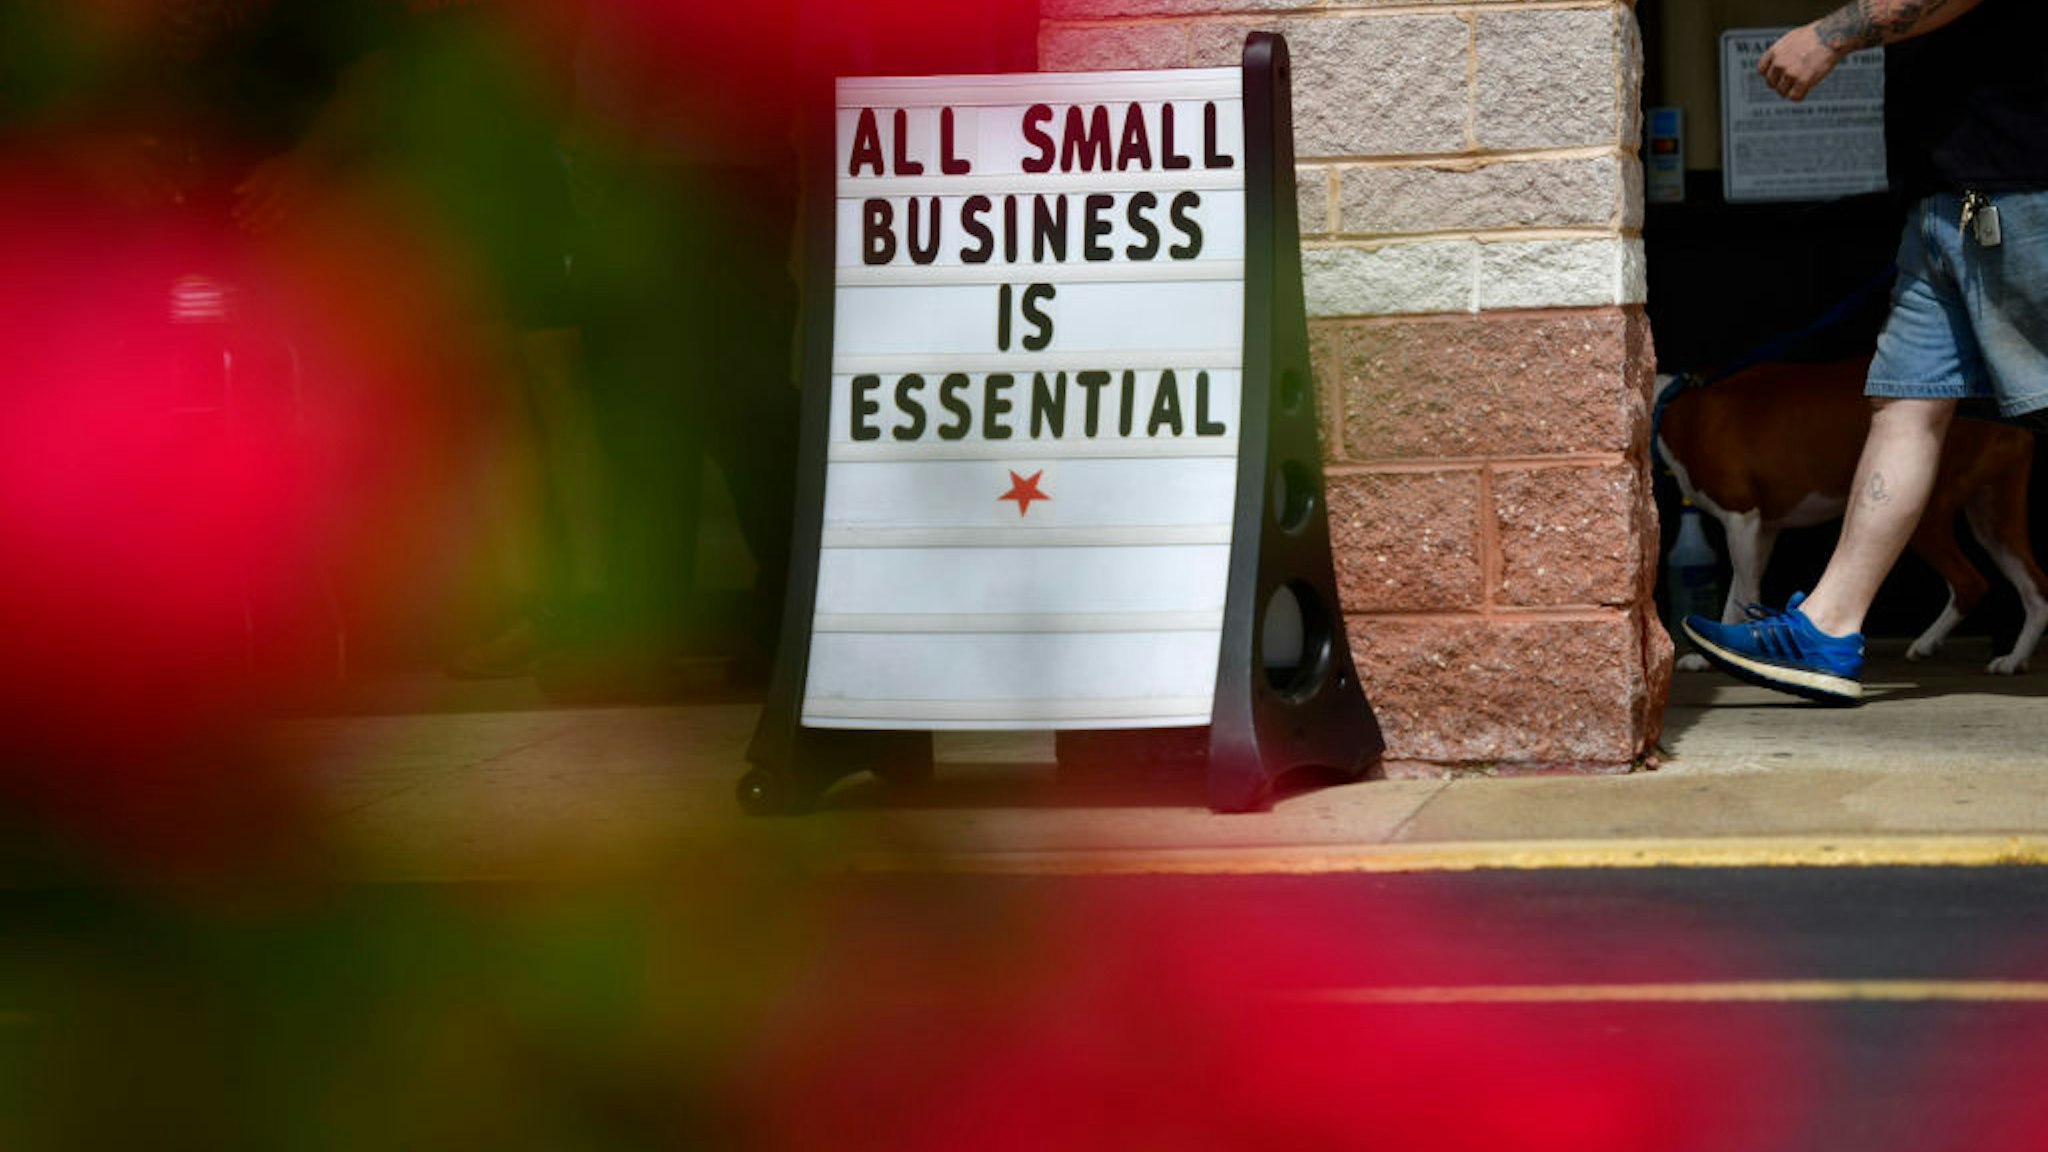 A man walks his dog past a placard stating "ALL SMALL BUSINESS IS ESSENTIAL" outside Atilis Gym on May 20, 2020 in Bellmawr, New Jersey.